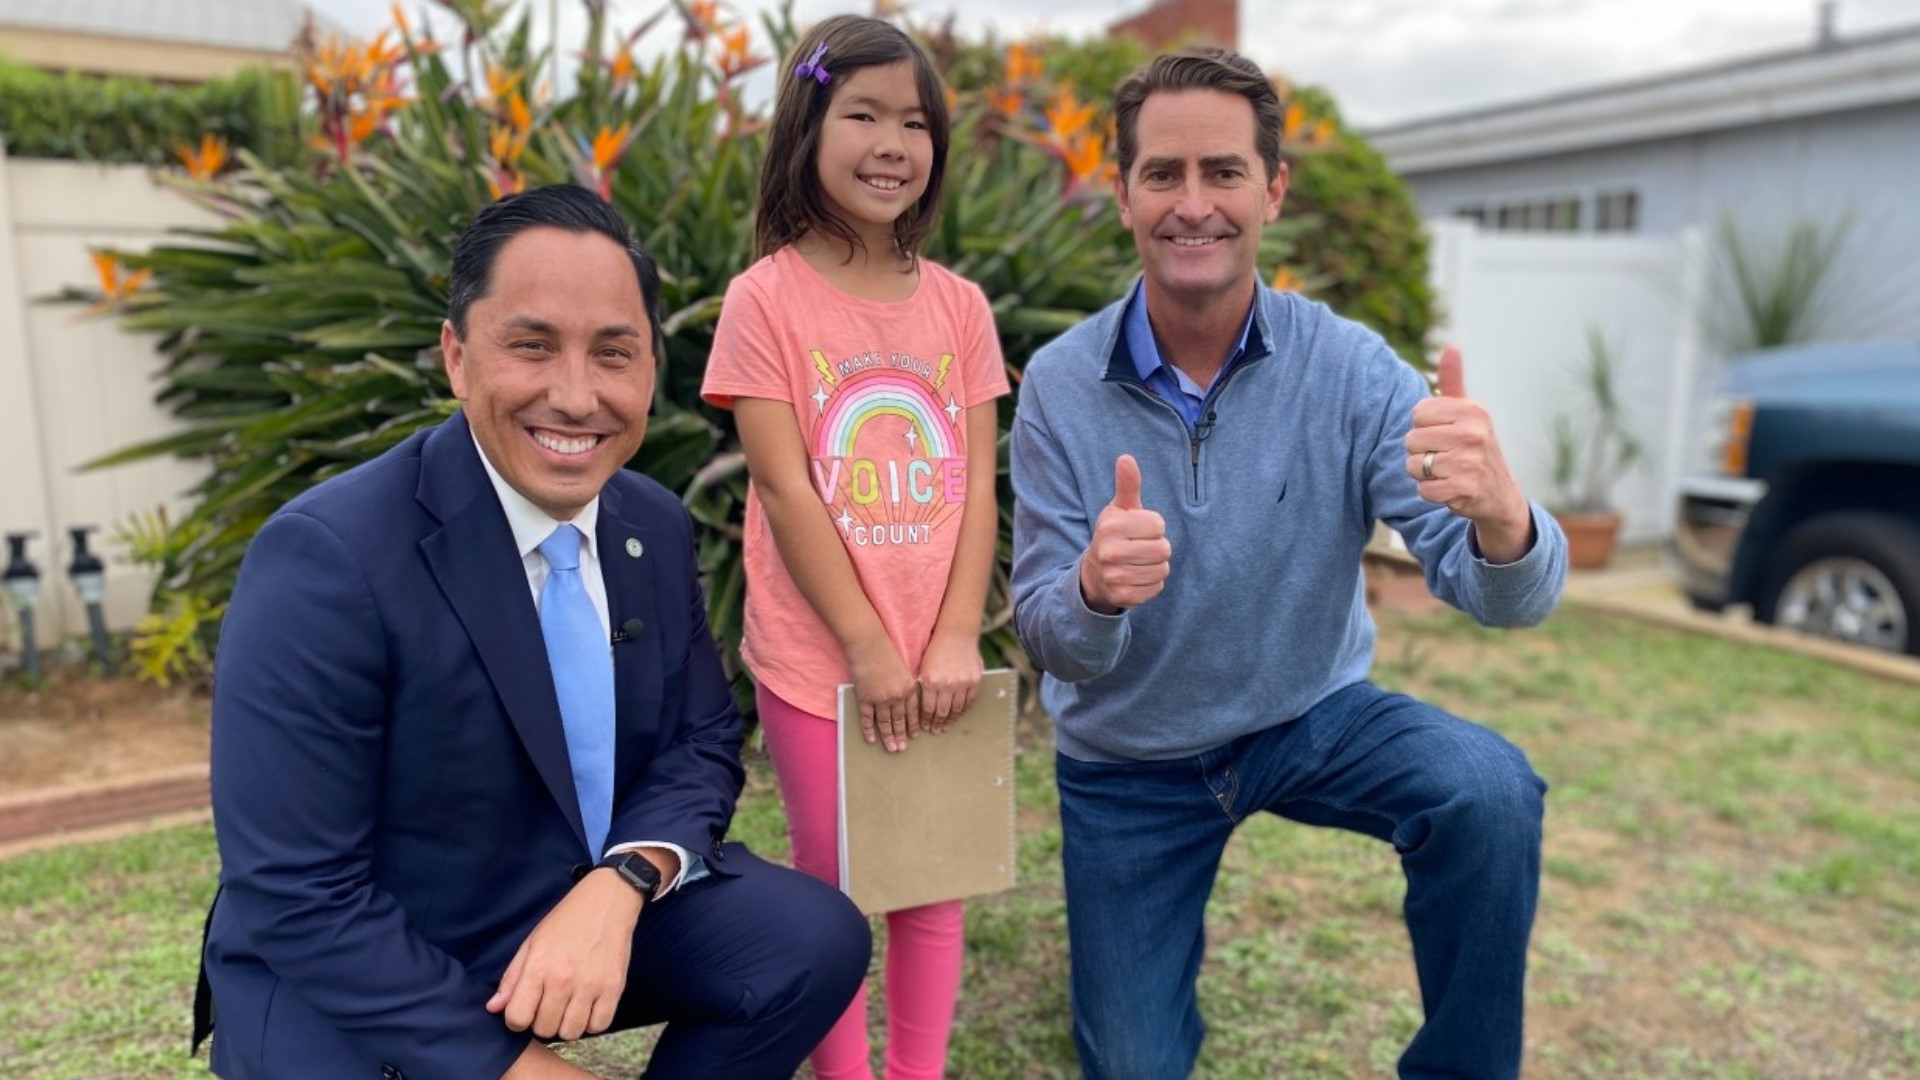 Mayor Todd Gloria watched Sky featured on the Zevely Zone on CBS 8 and reached out within seconds.